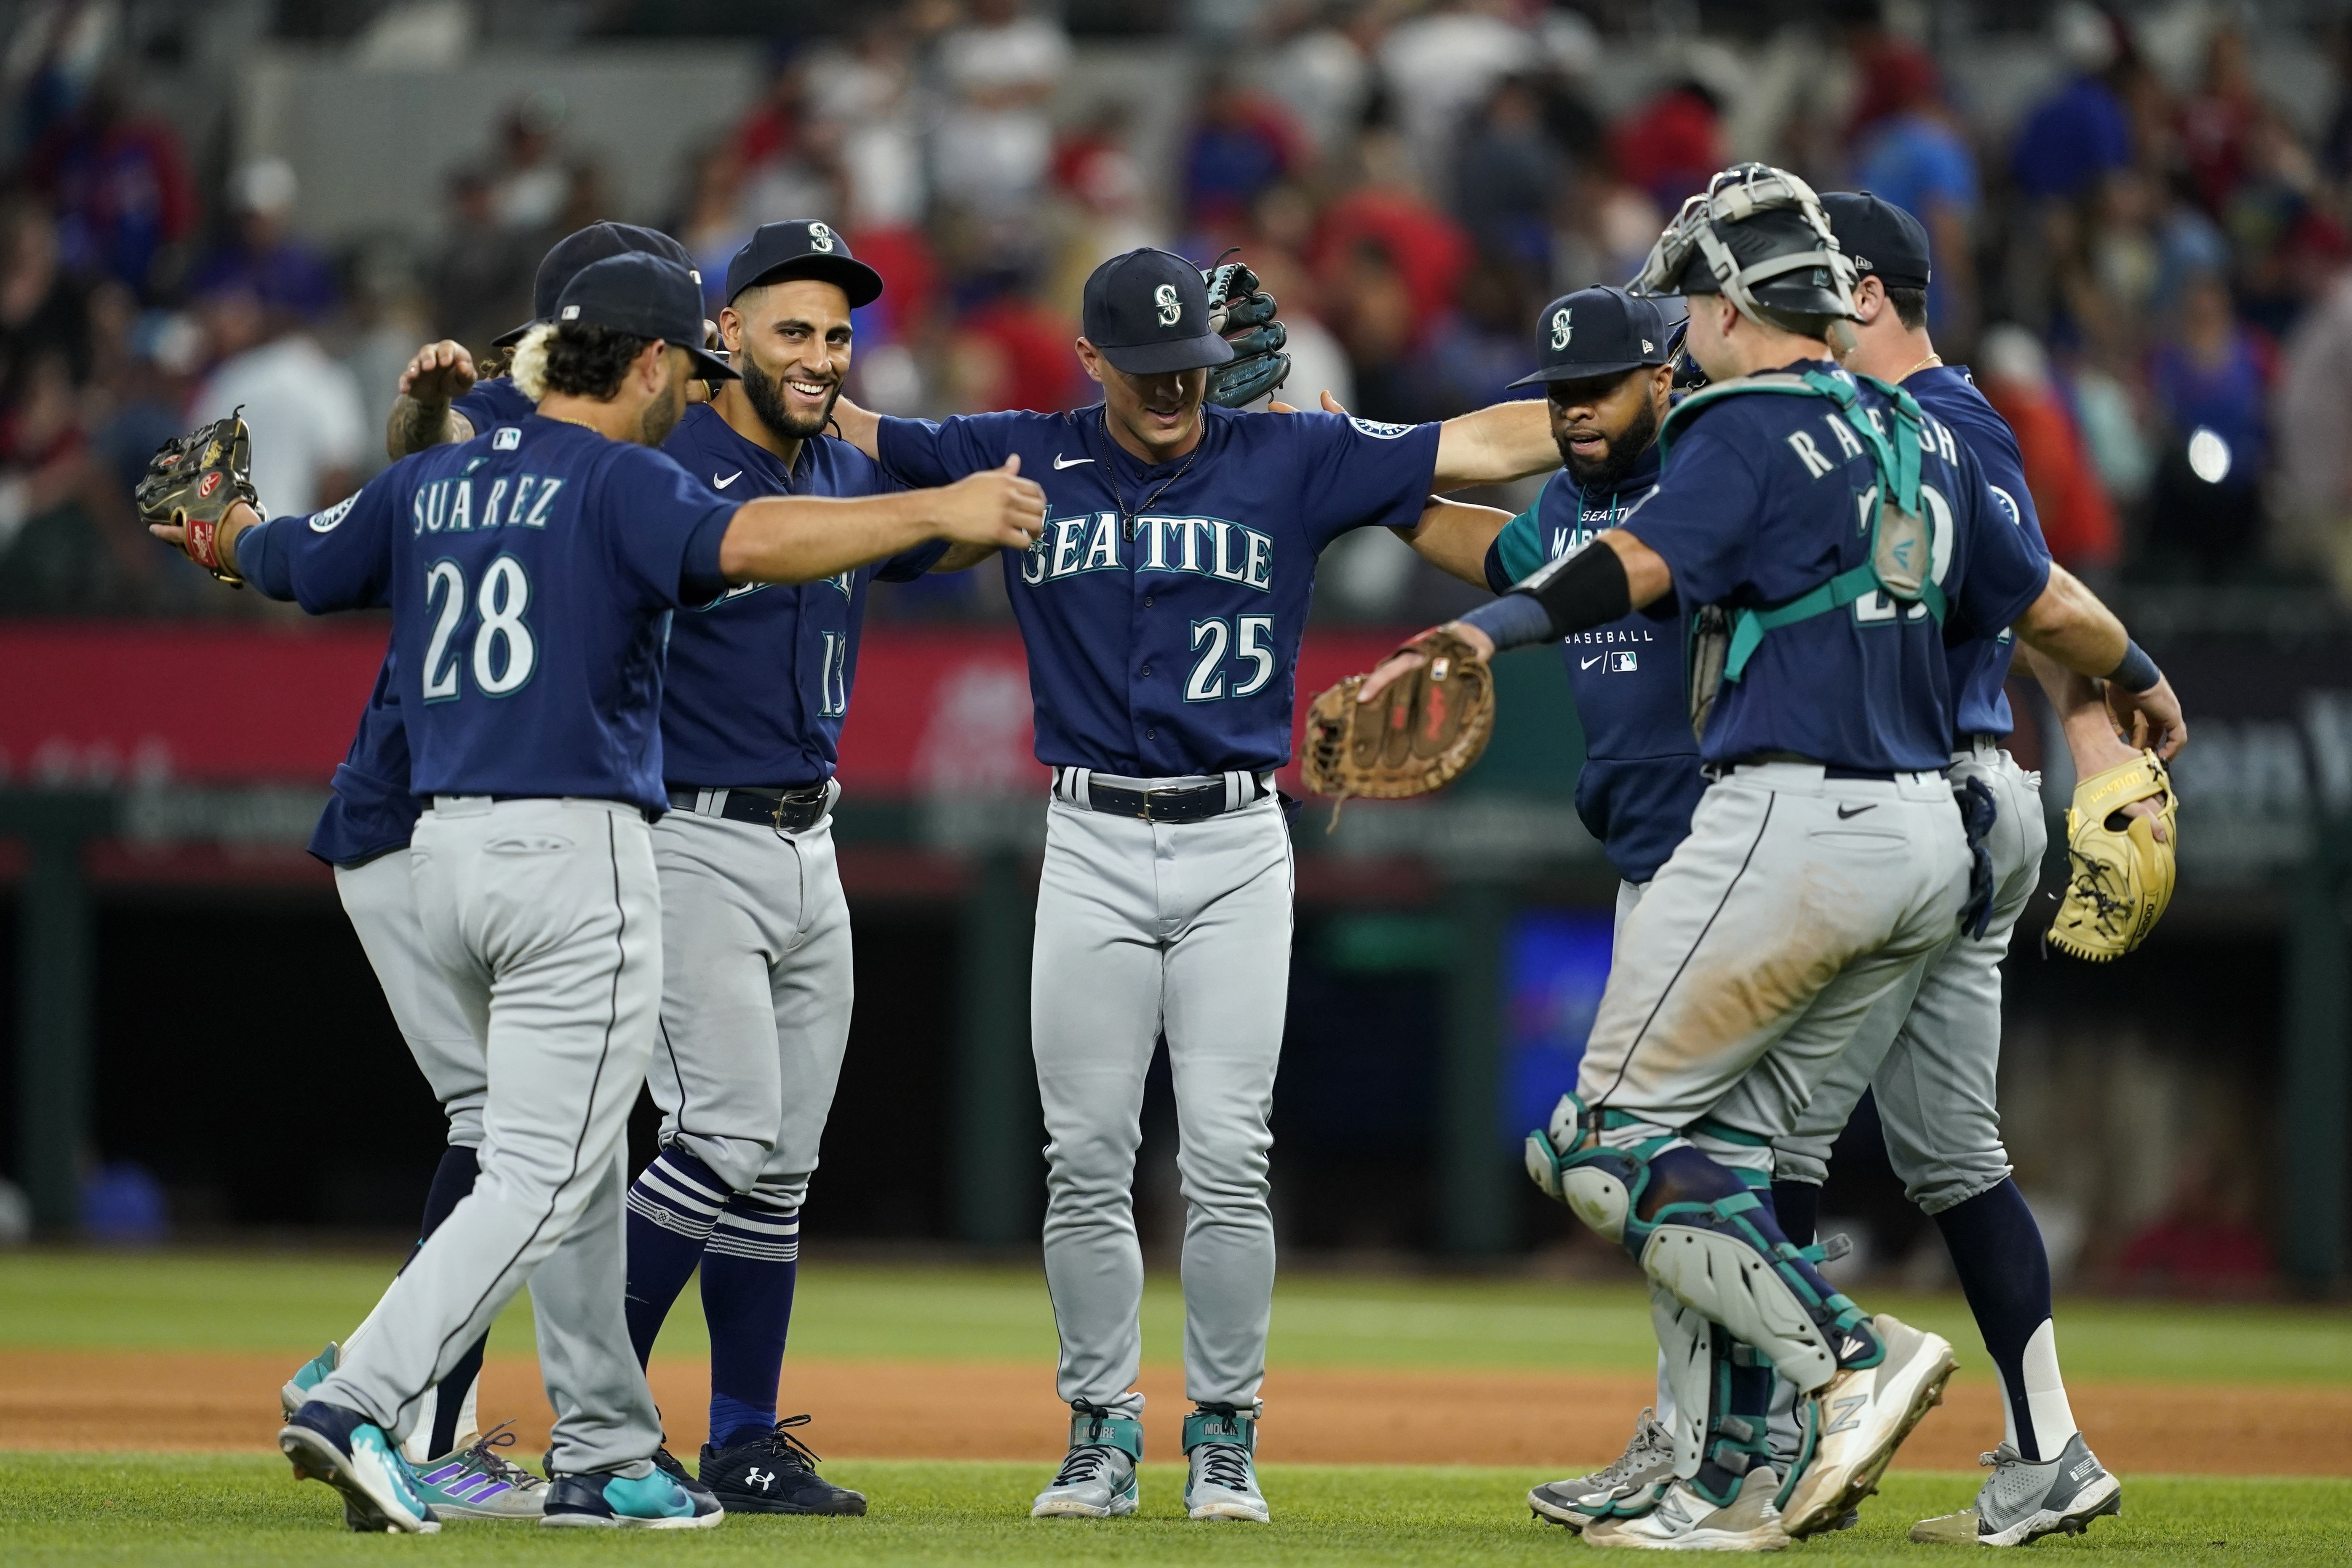 Castillo and Crawford lead the Mariners to a 4-0 victory over the